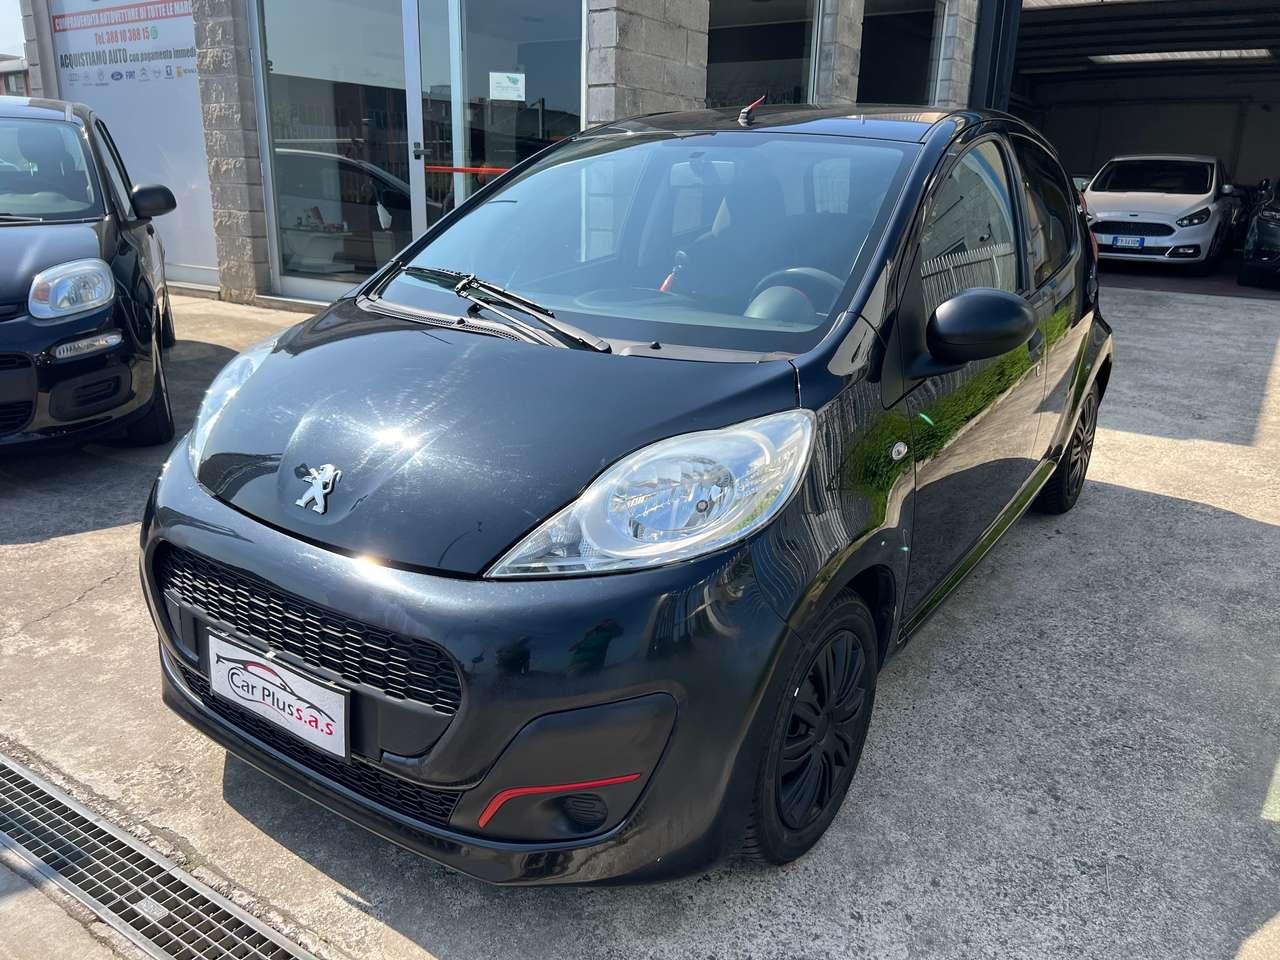 Used Peugeot 107 ad : Year 2013, 111000 km